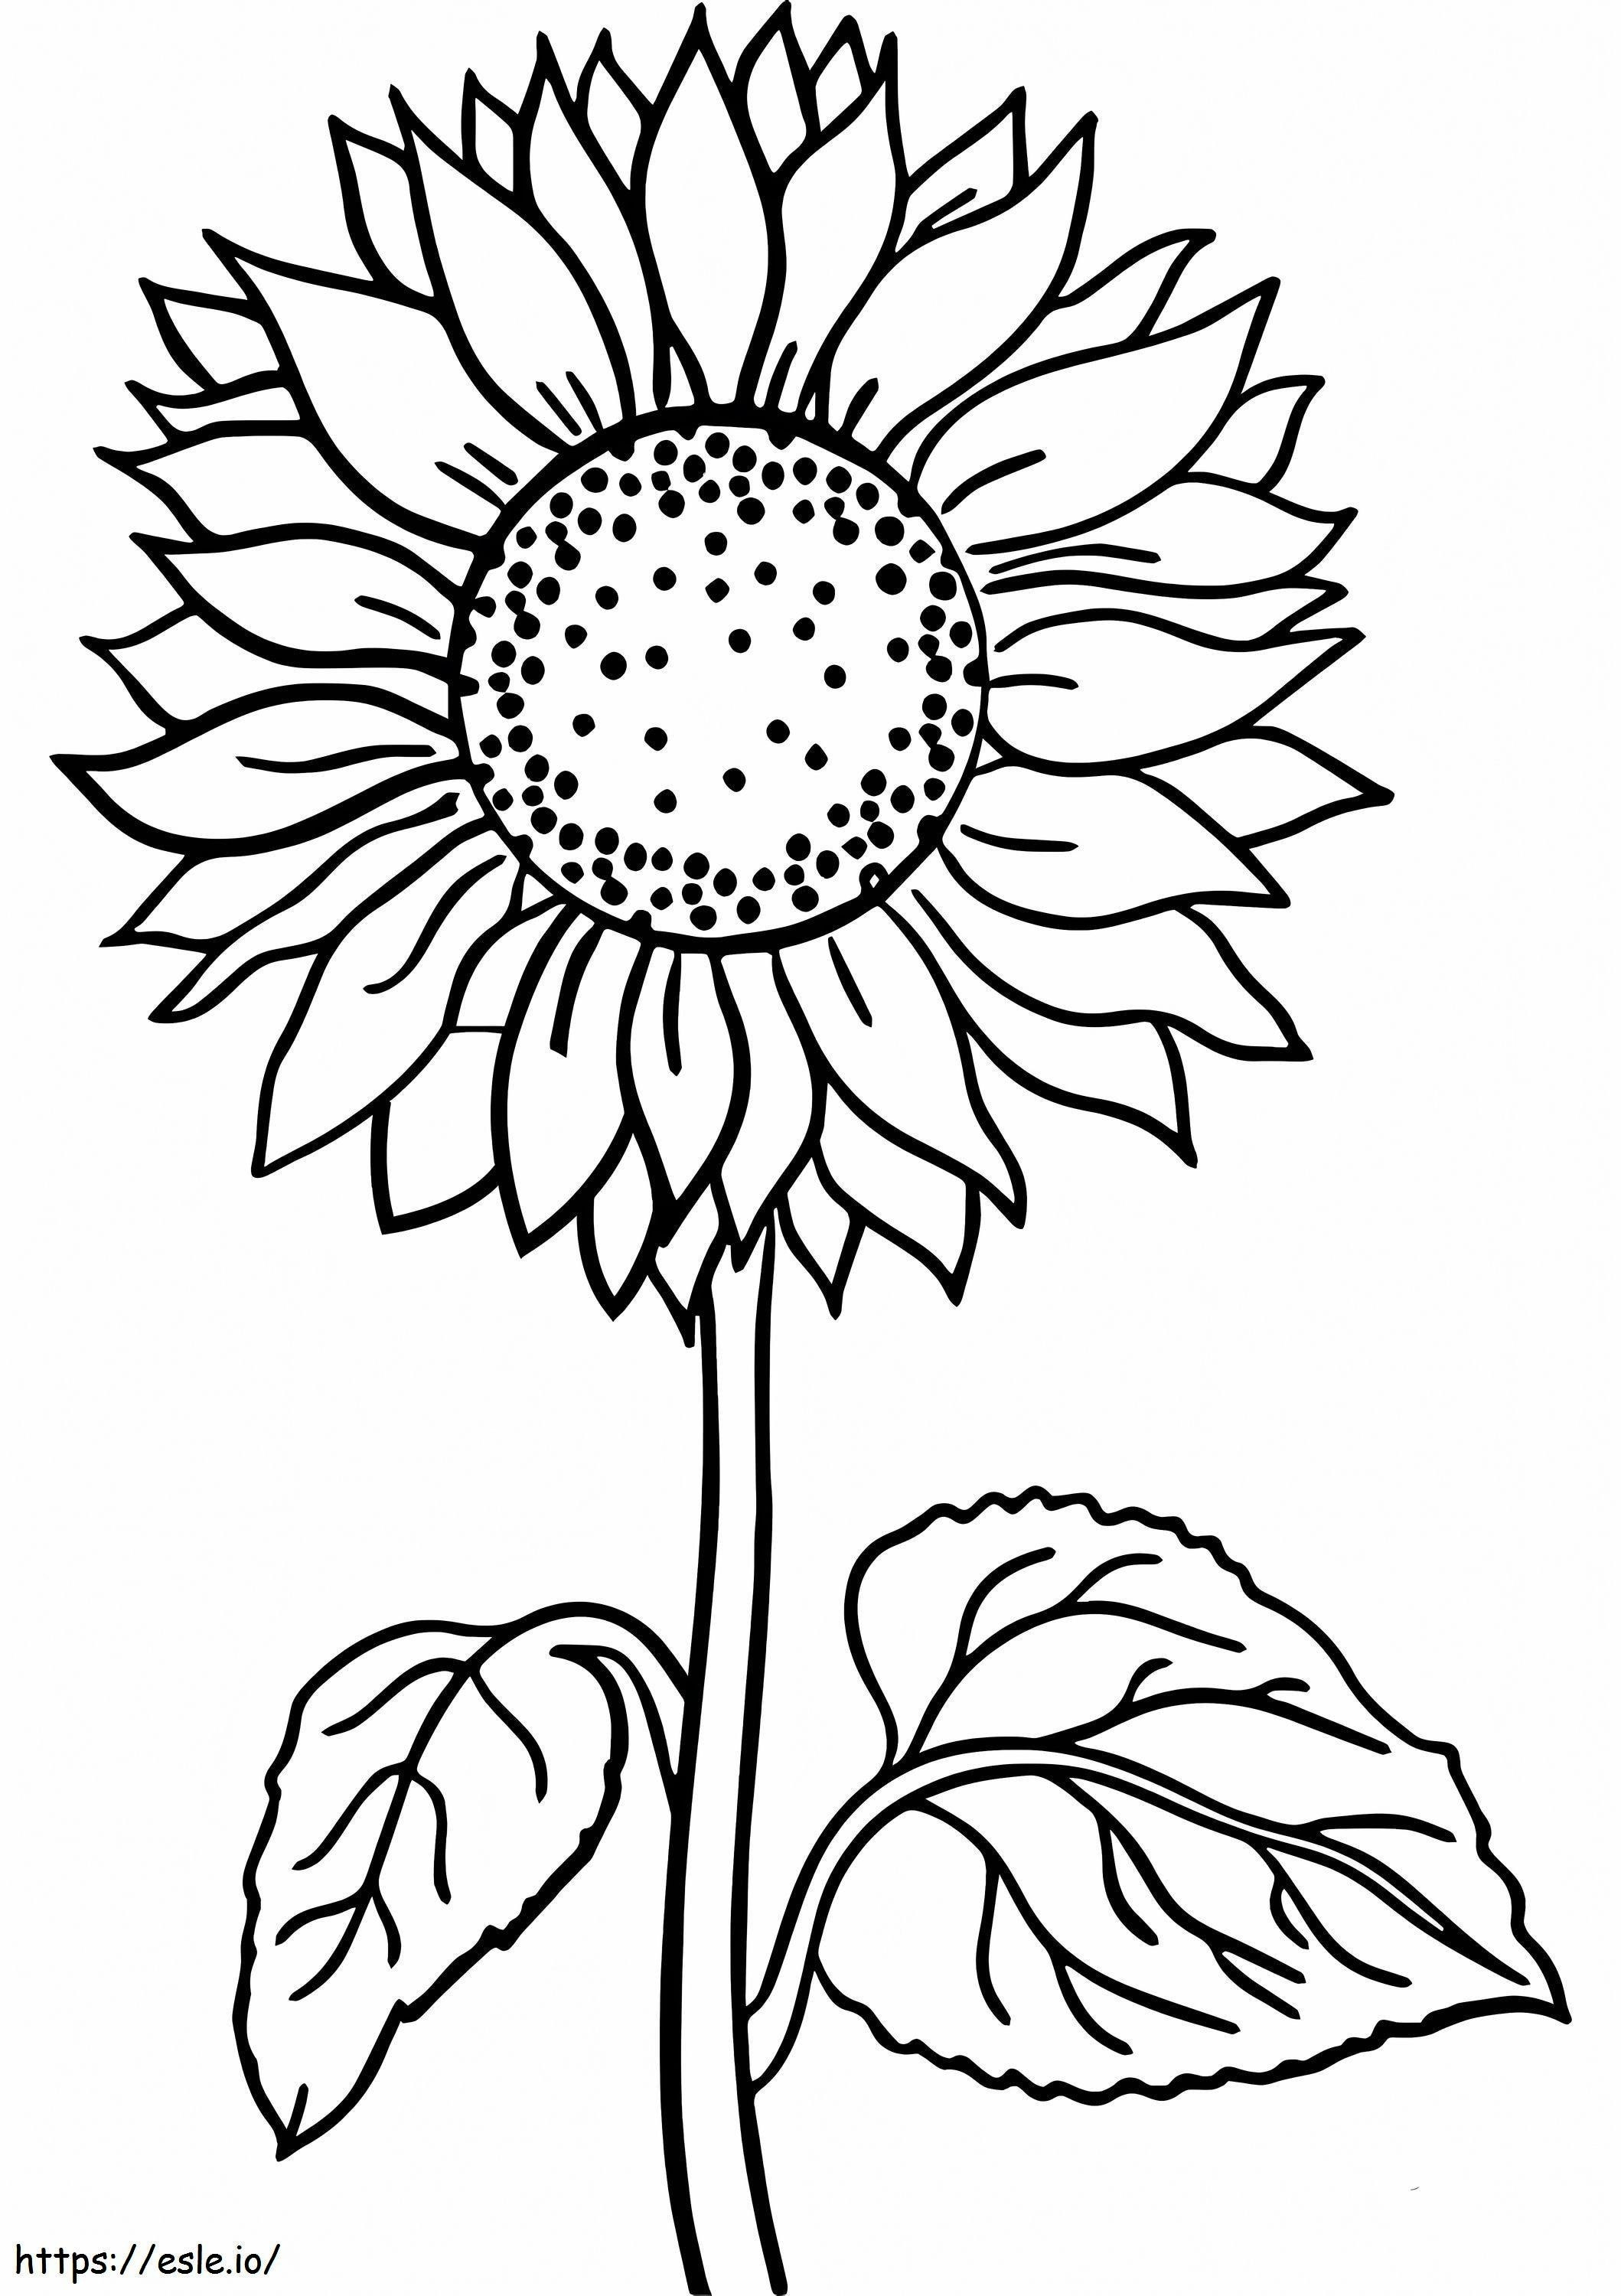 Basic Sunflower coloring page